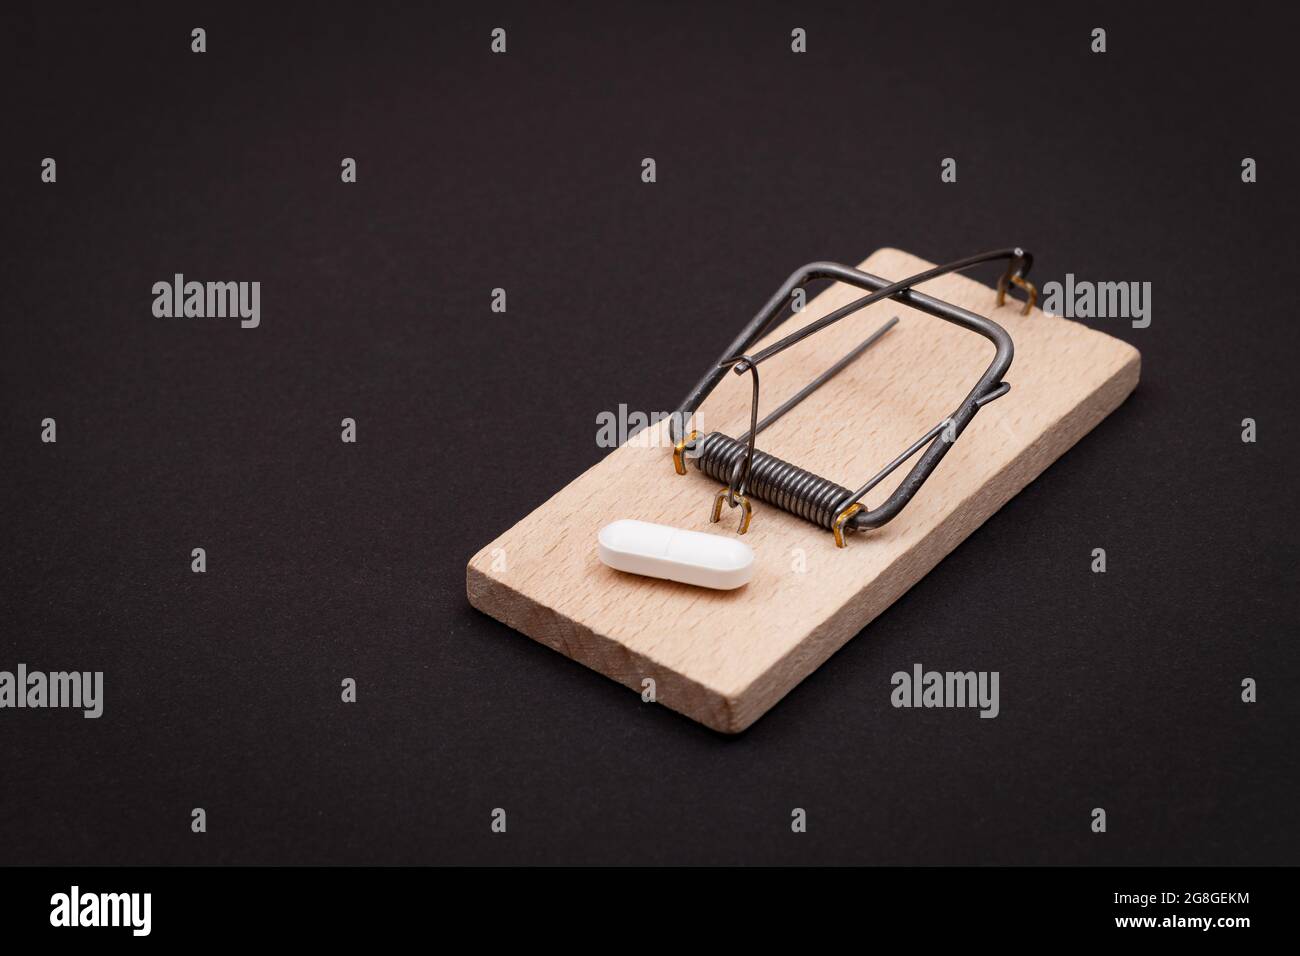 Pharmaceutical Addiction or Big Pharma Trap - White Pill in Wooden Mousetrap on Black Background Stock Photo